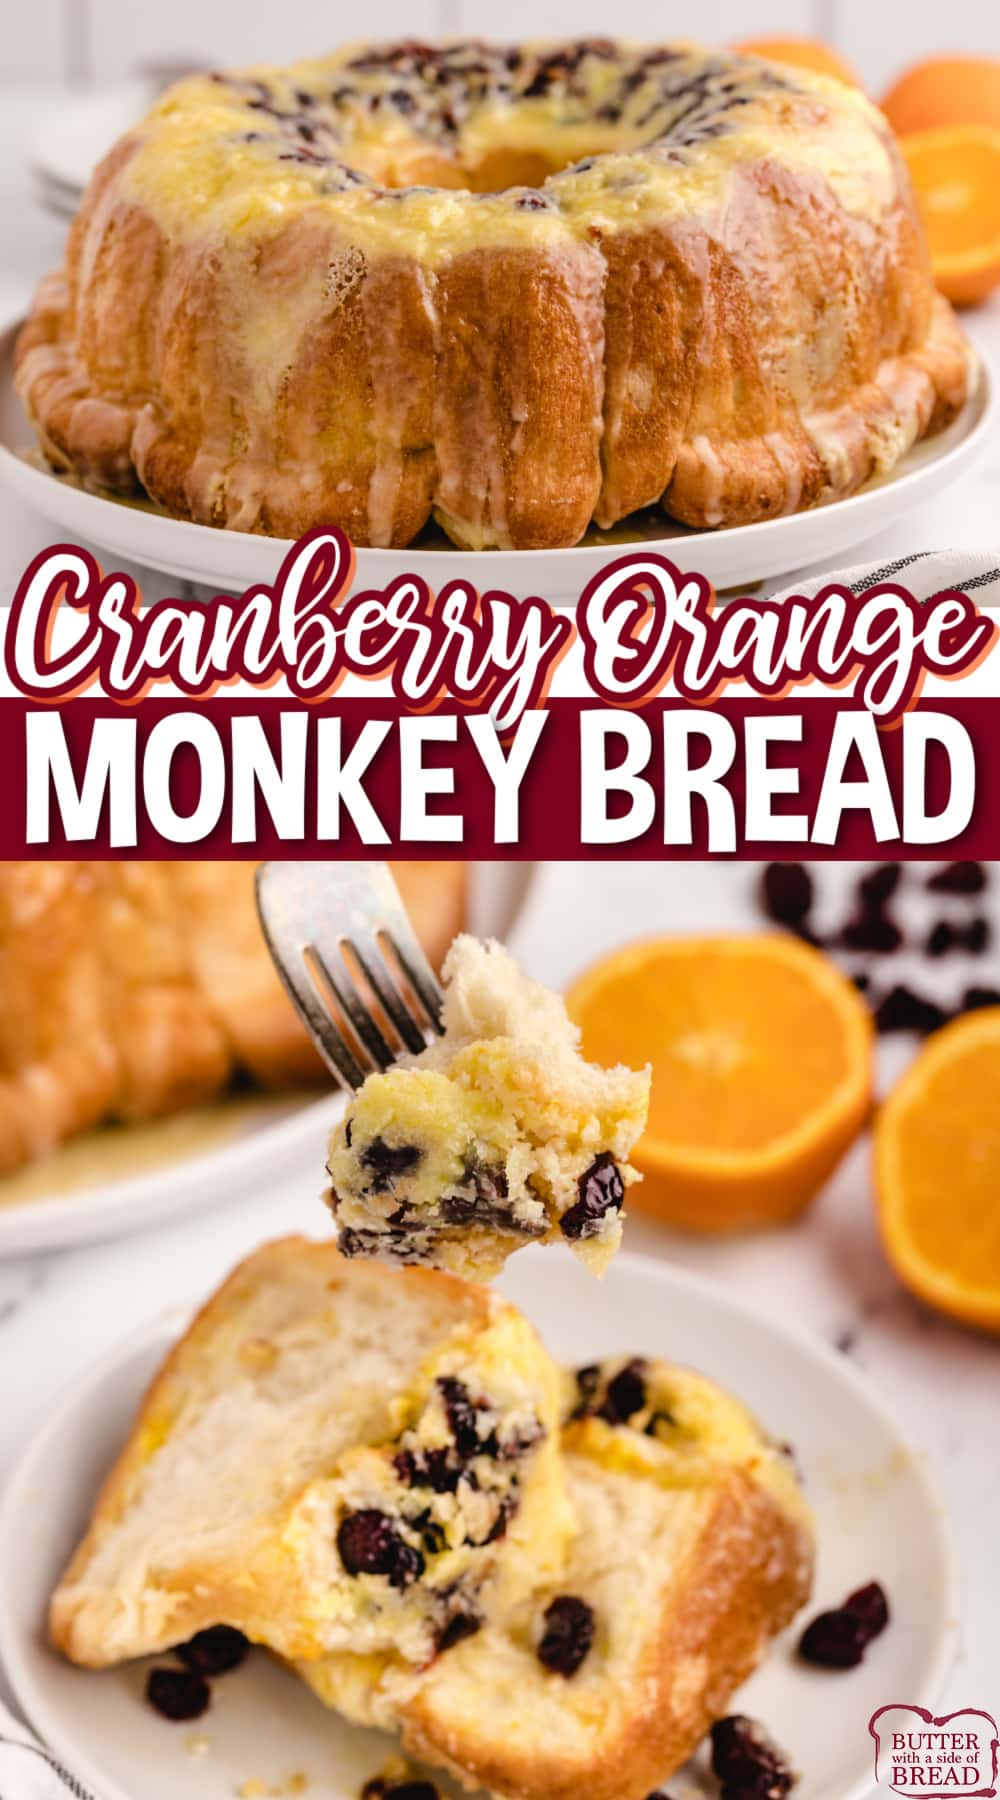 Cranberry Orange Monkey Bread made with frozen rolls, dried cranberries, instant pudding mix and orange juice. Only a few minutes to make these delicious orange pull-aparts that are perfect for fall!